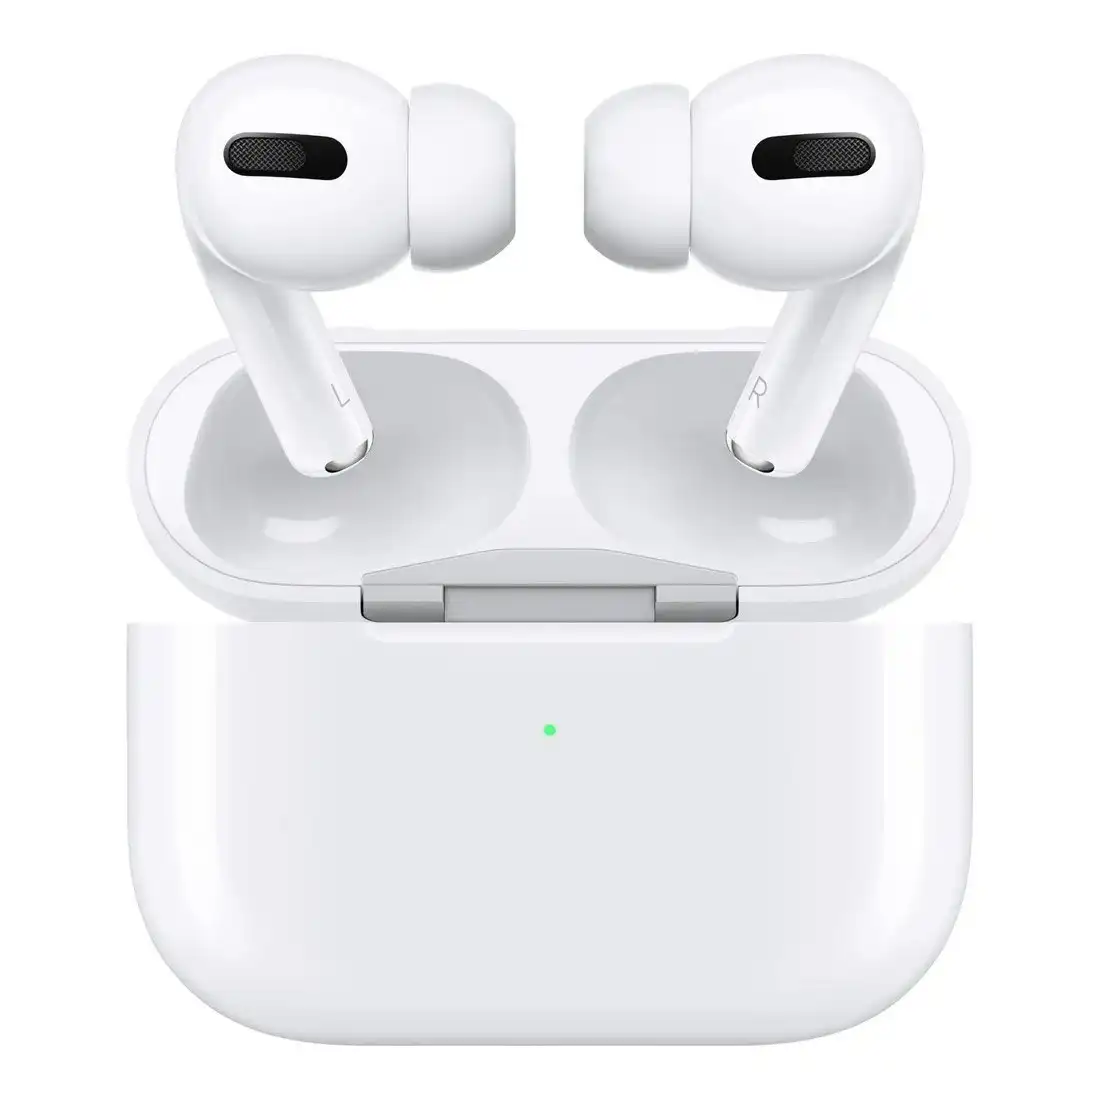 [Refur] Apple AirPods Pro with MagSafe Charging Case MLWK3ZA/A [Refurbished] - Good